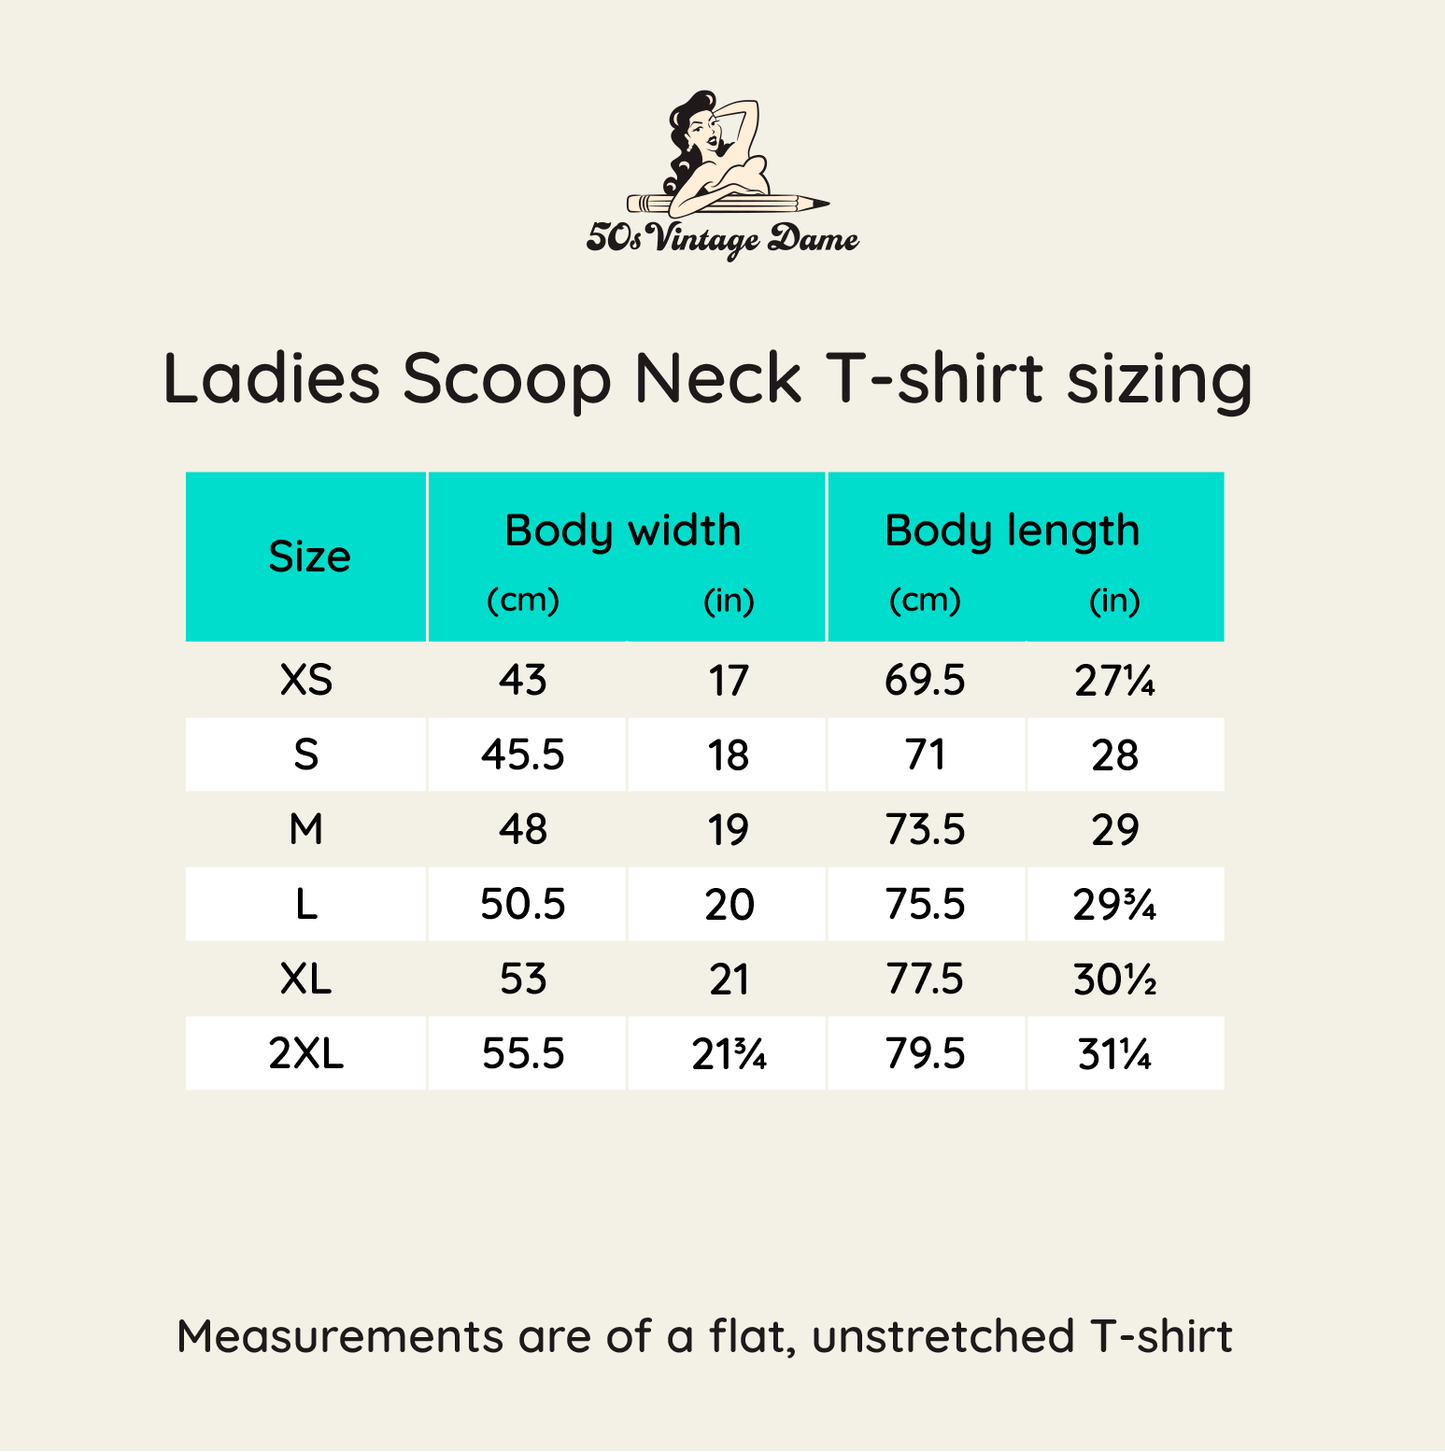 Size chat for ladies coop neck fitted tee shirt : XS, S, M, L, XL, 2XL